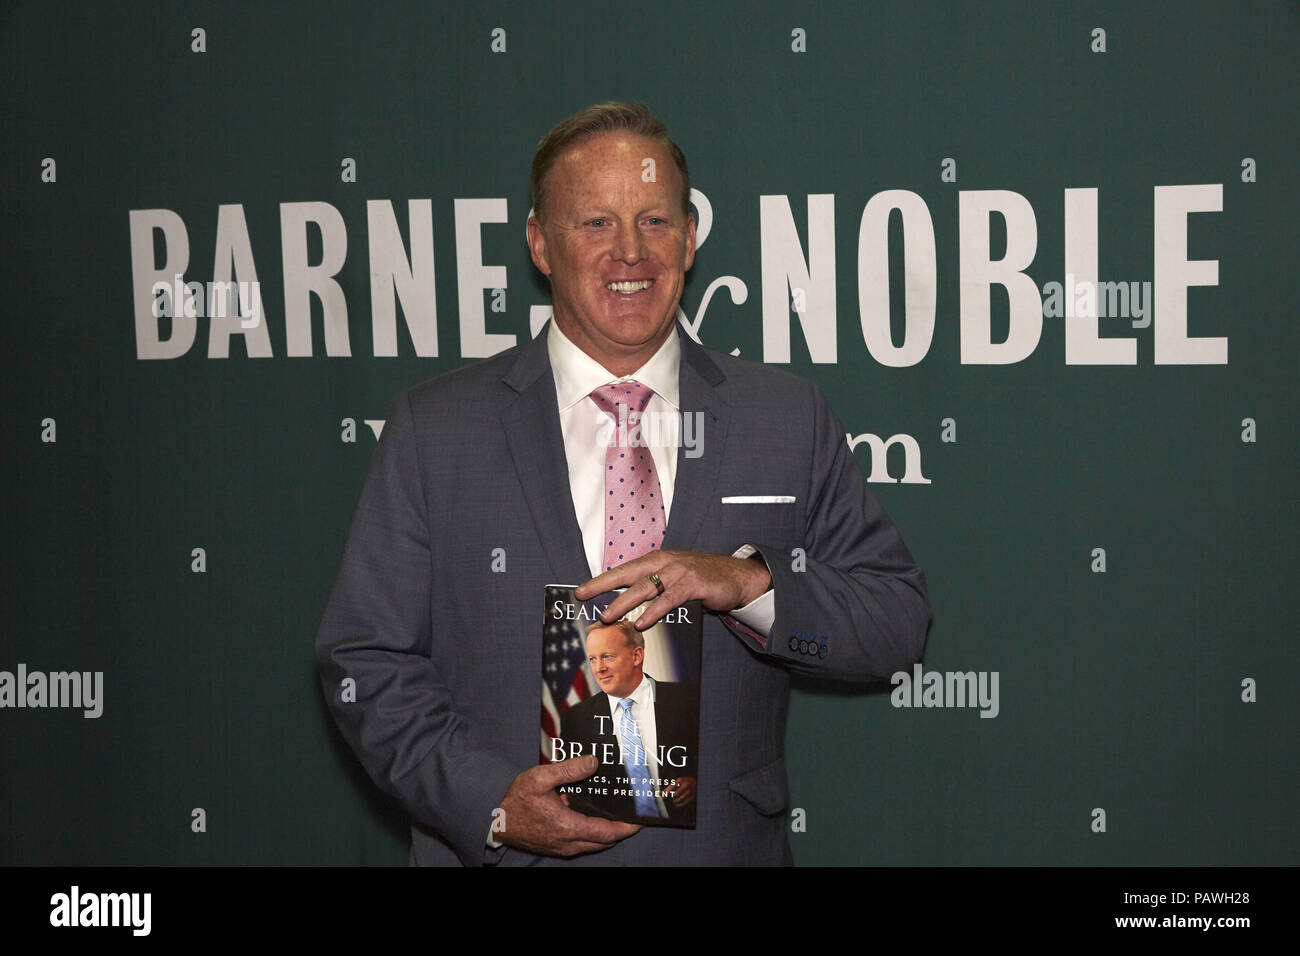 New York, New York, USA. 25th July, 2018. Sean Spicer, The Briefing, book signing and talk at Barnes and Noble, Union Square Book Store, New York, NY USA Credit: Mark J. Sullivan/ZUMA Wire/Alamy Live News Stock Photo